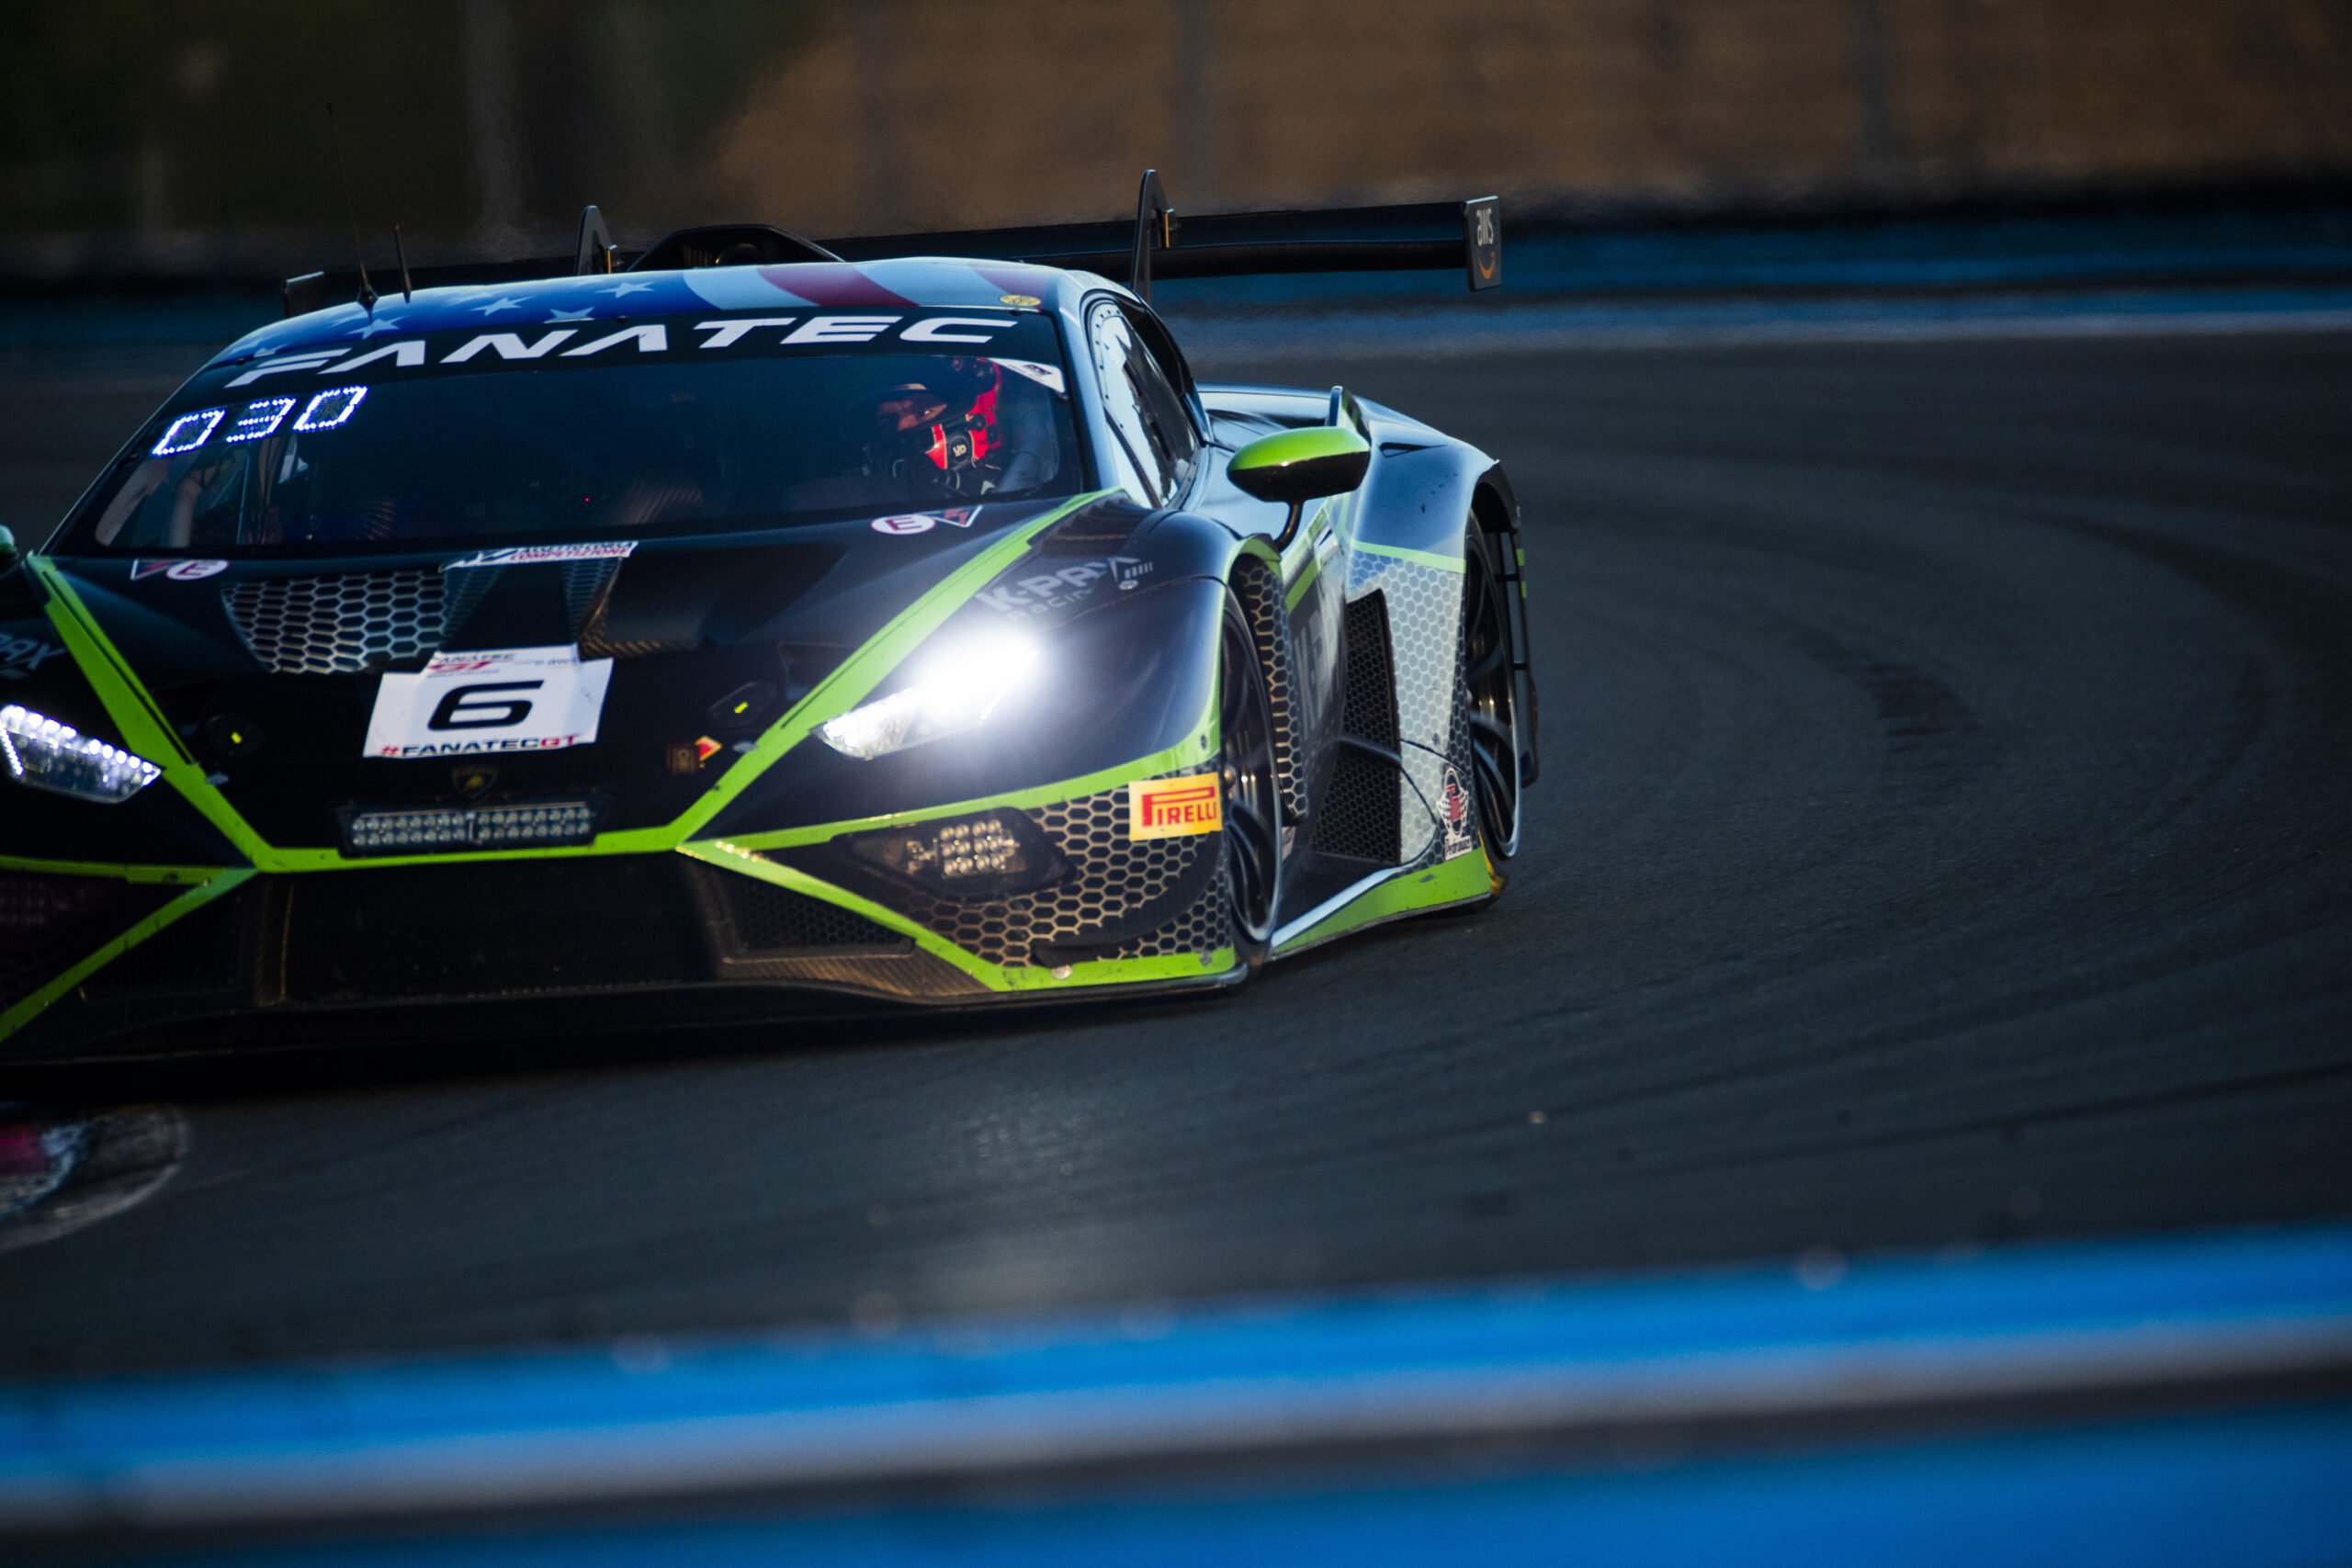 Pushing for a deserved result: K-PAX Racing sets sights on the Nürburgring